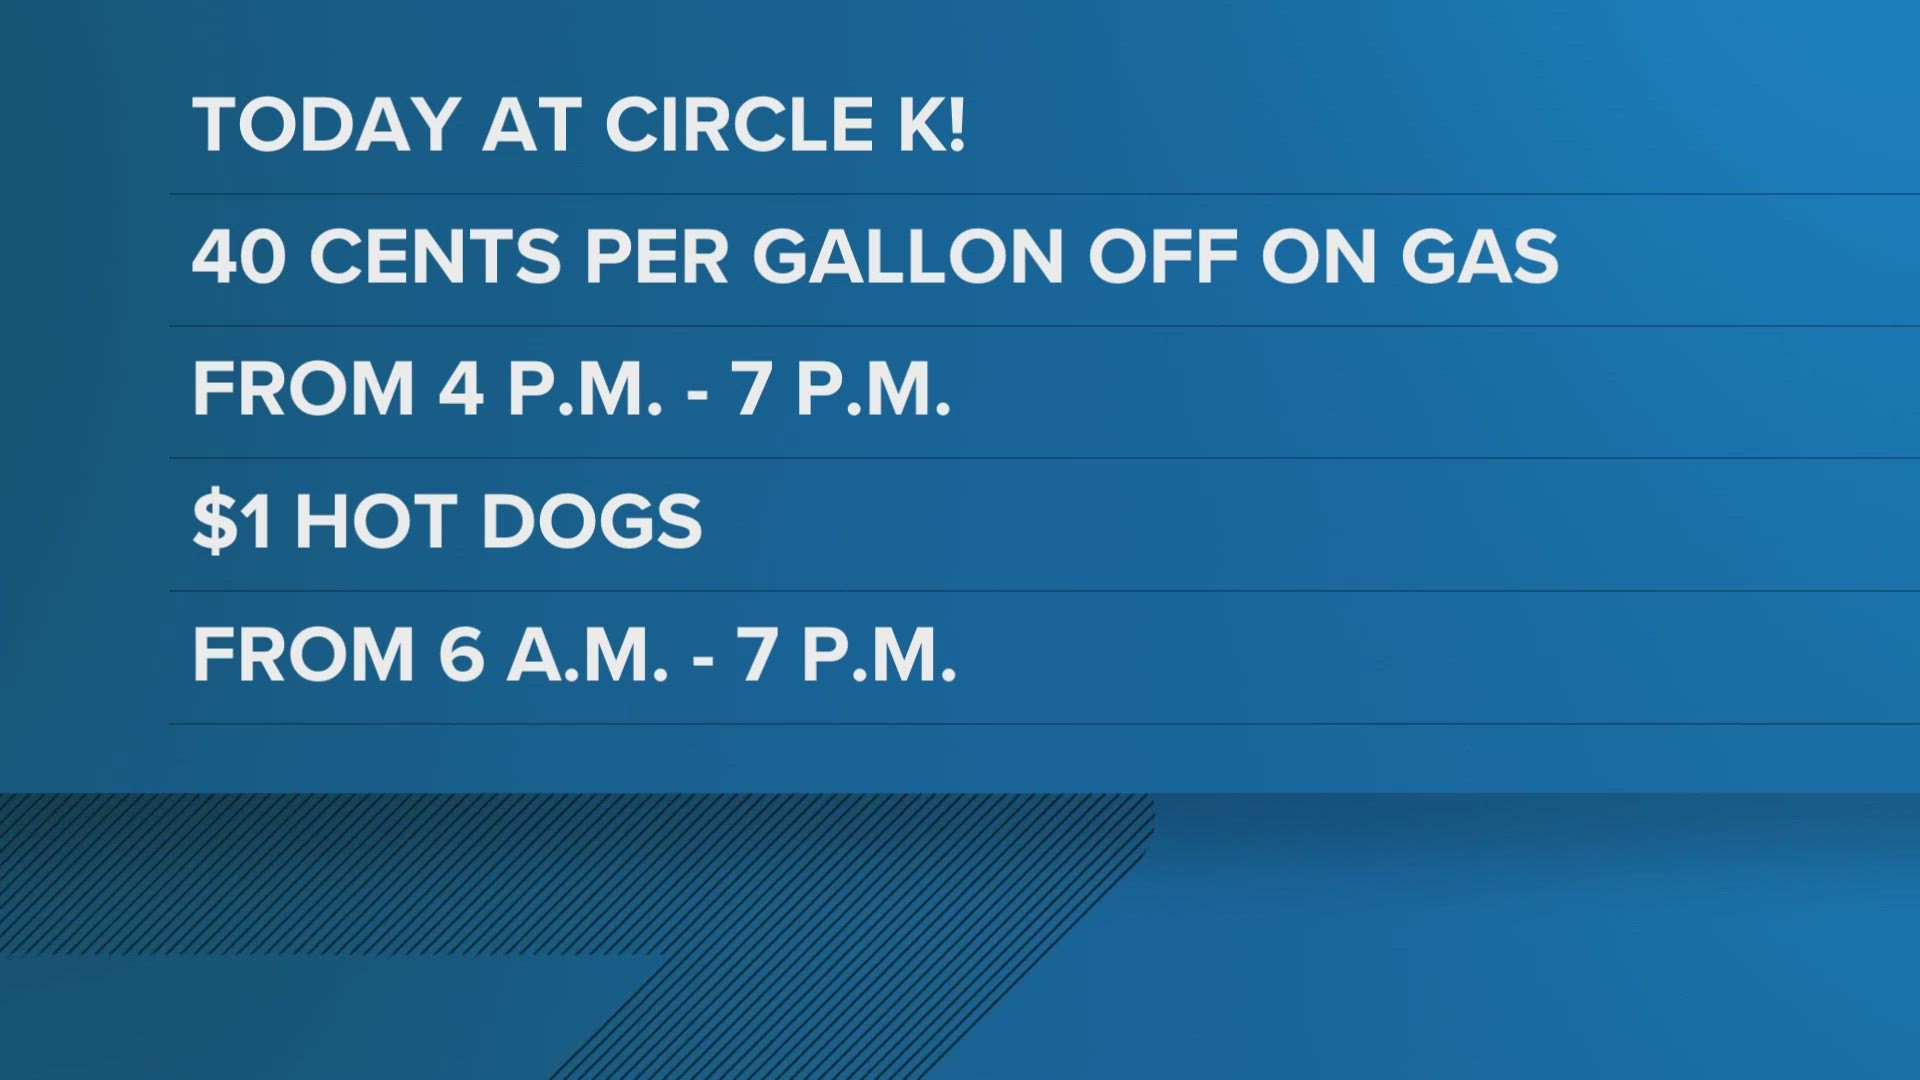 Circle K gas offering 40 cents off per gallon of gas Thursday afternoon